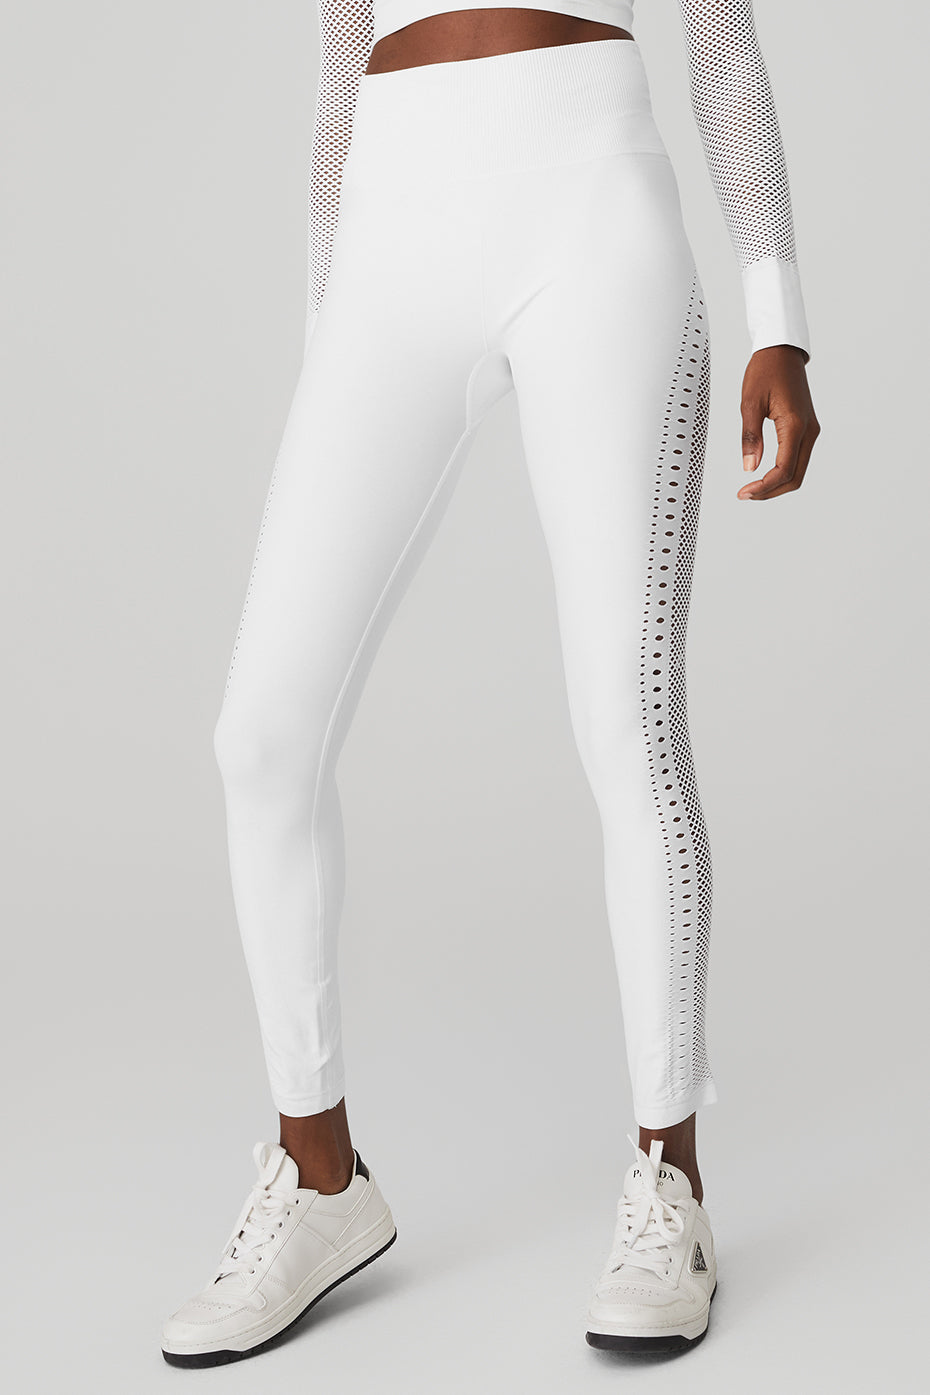 Alo Yoga Seamless High-Waist 7/8 Limitless Open Air Legging in White, Size:  2XS